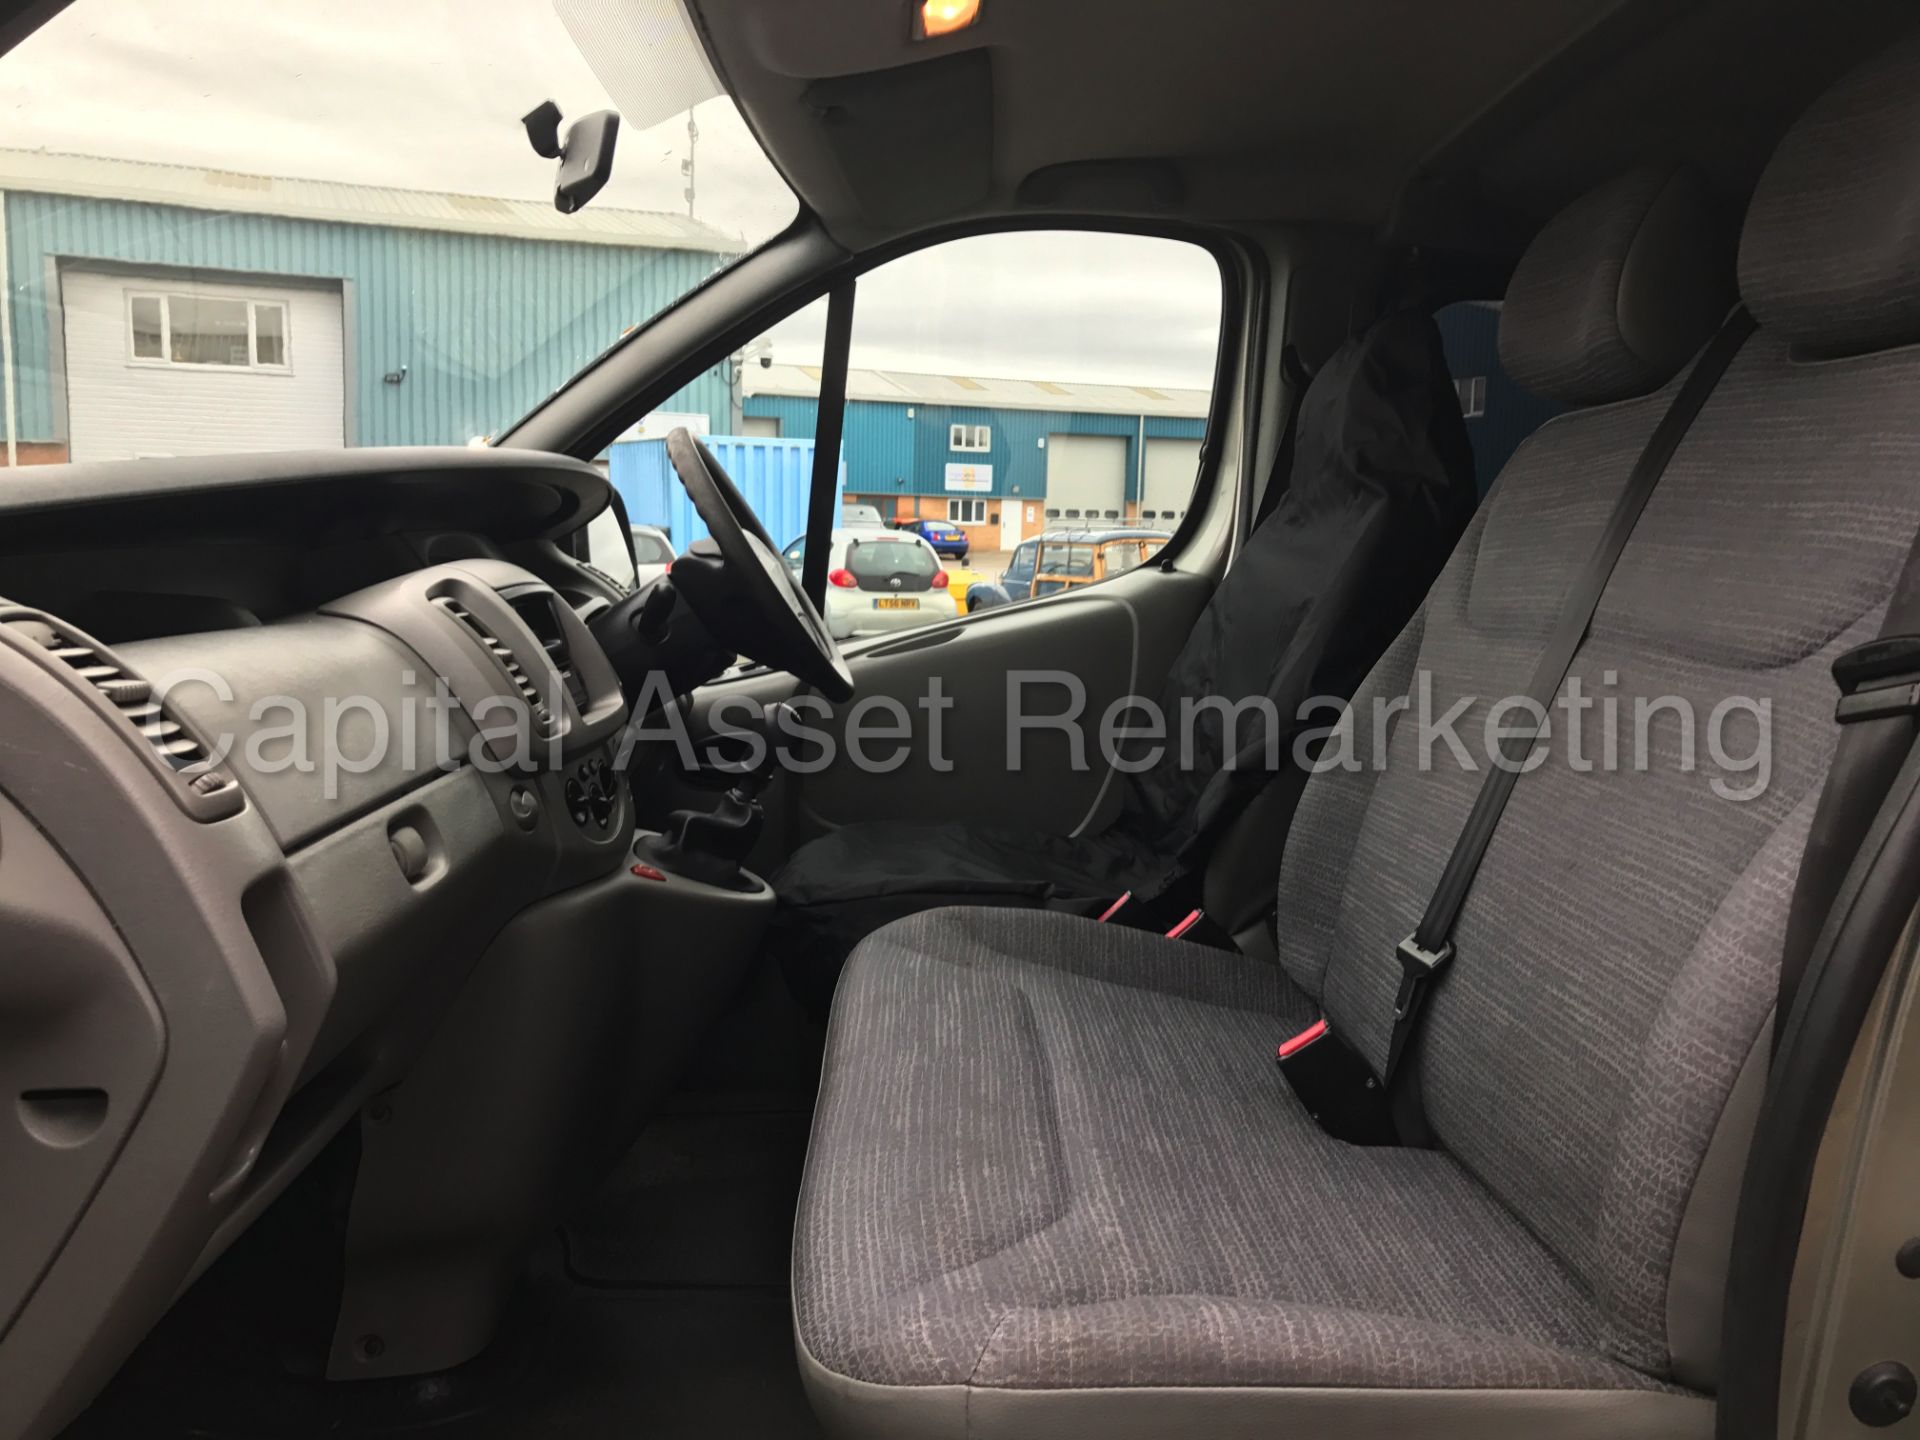 RENAULT TRAFIC SL29 '9 SEATER BUS' (2007) '1.9 DCI - 115 PS - 6 SPEED - A/C' (NO VAT - SAVE 20%) - Image 20 of 26